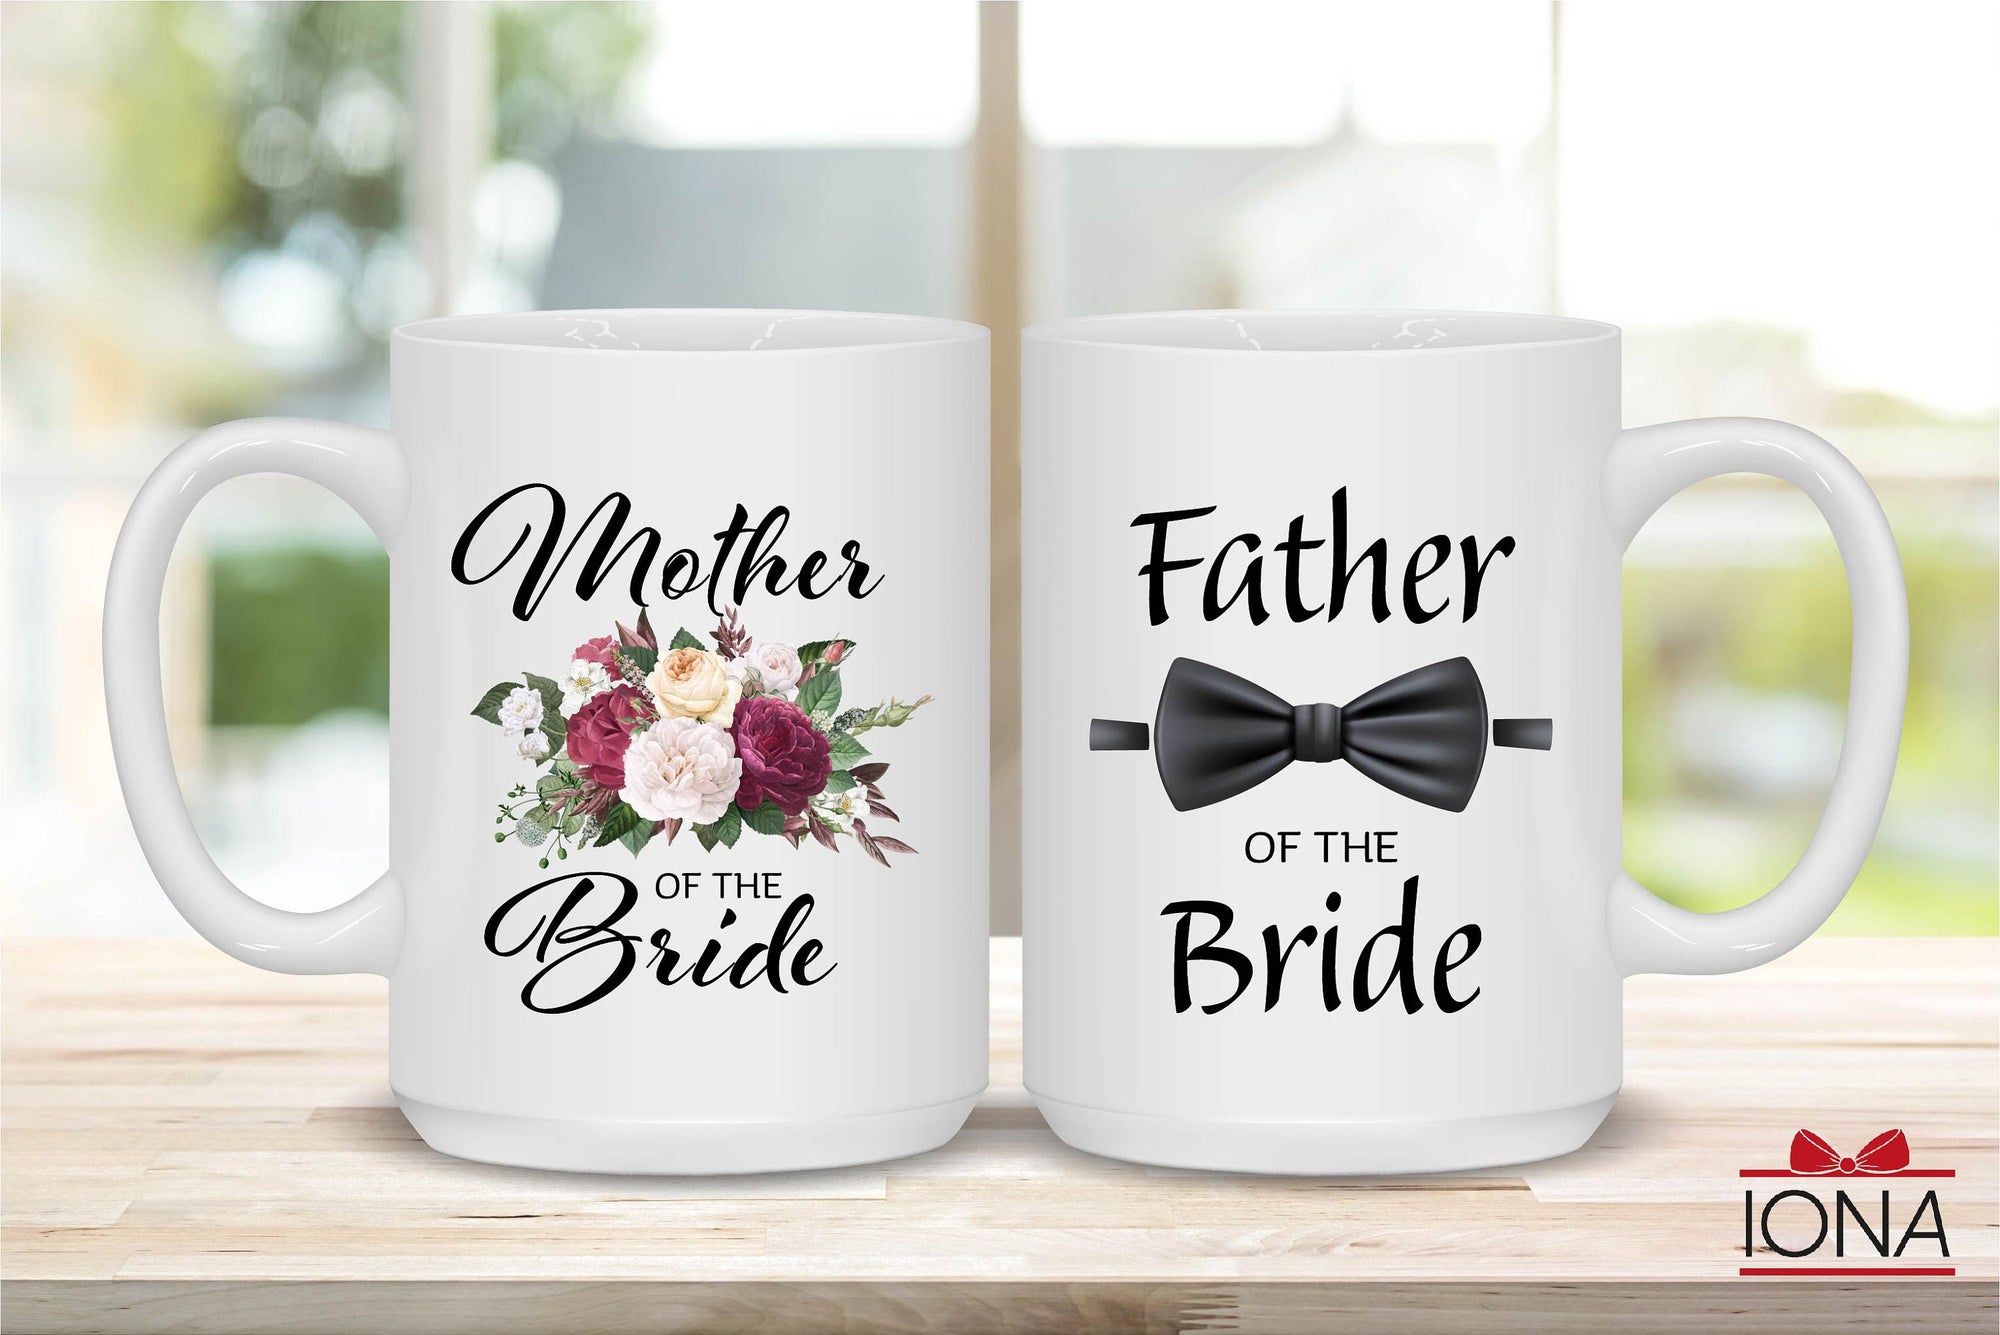 Mother of the Bride Mug, Father of the Bride Mug. Mother of the Bride Gift, Father of the Bride Gift, MOB gift FOB gift, Wedding Coffee Mugs